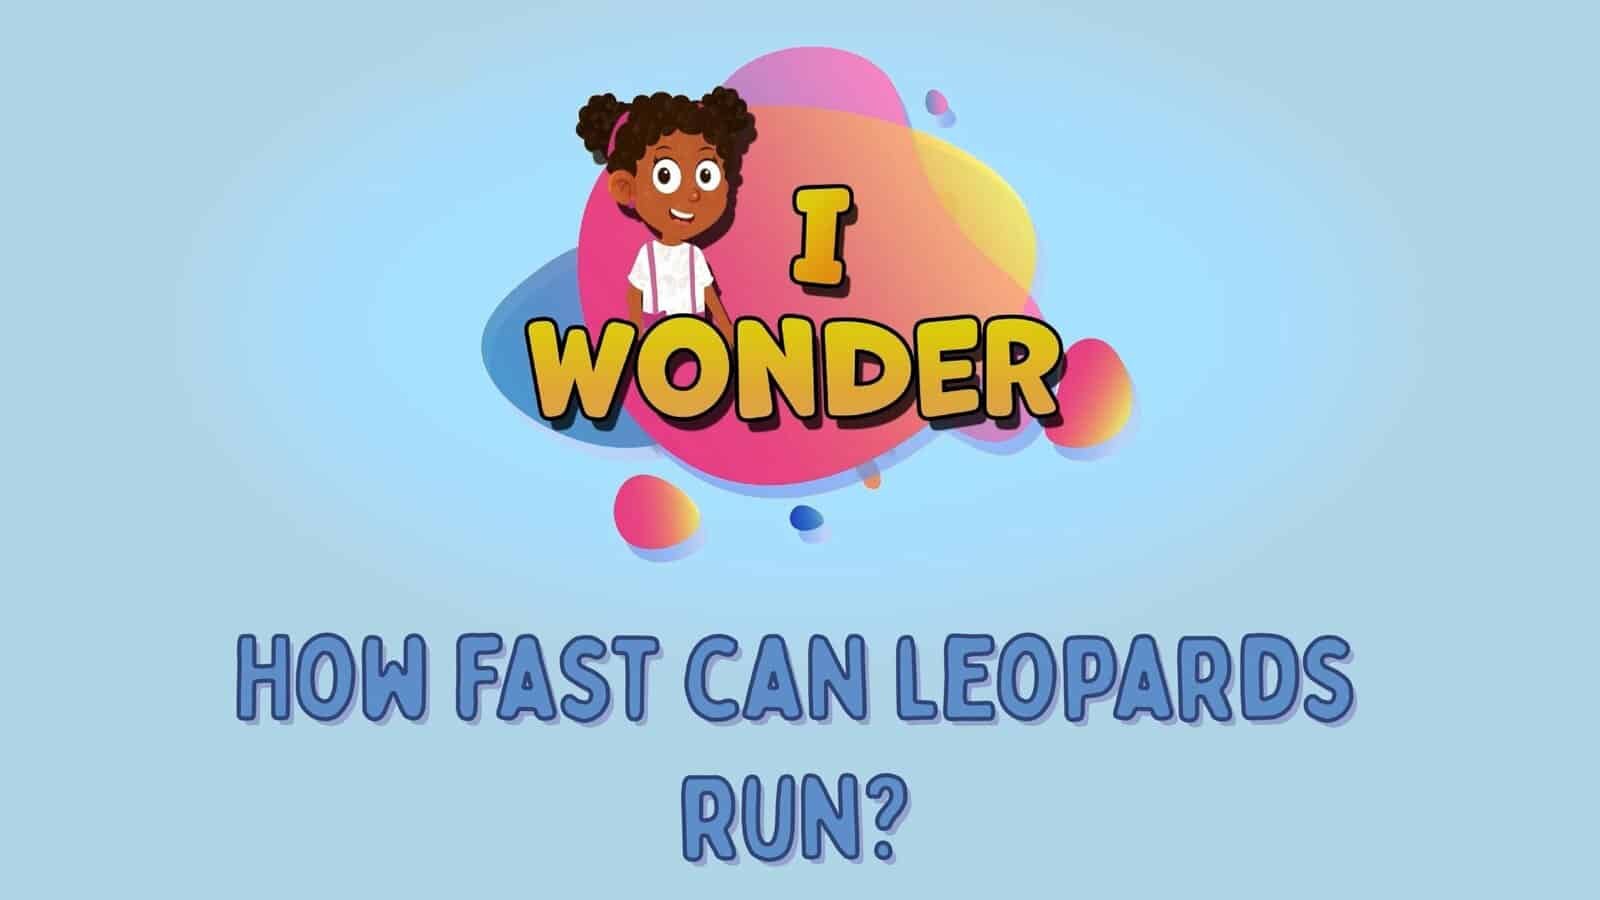 How Fast Can Leopards Run?